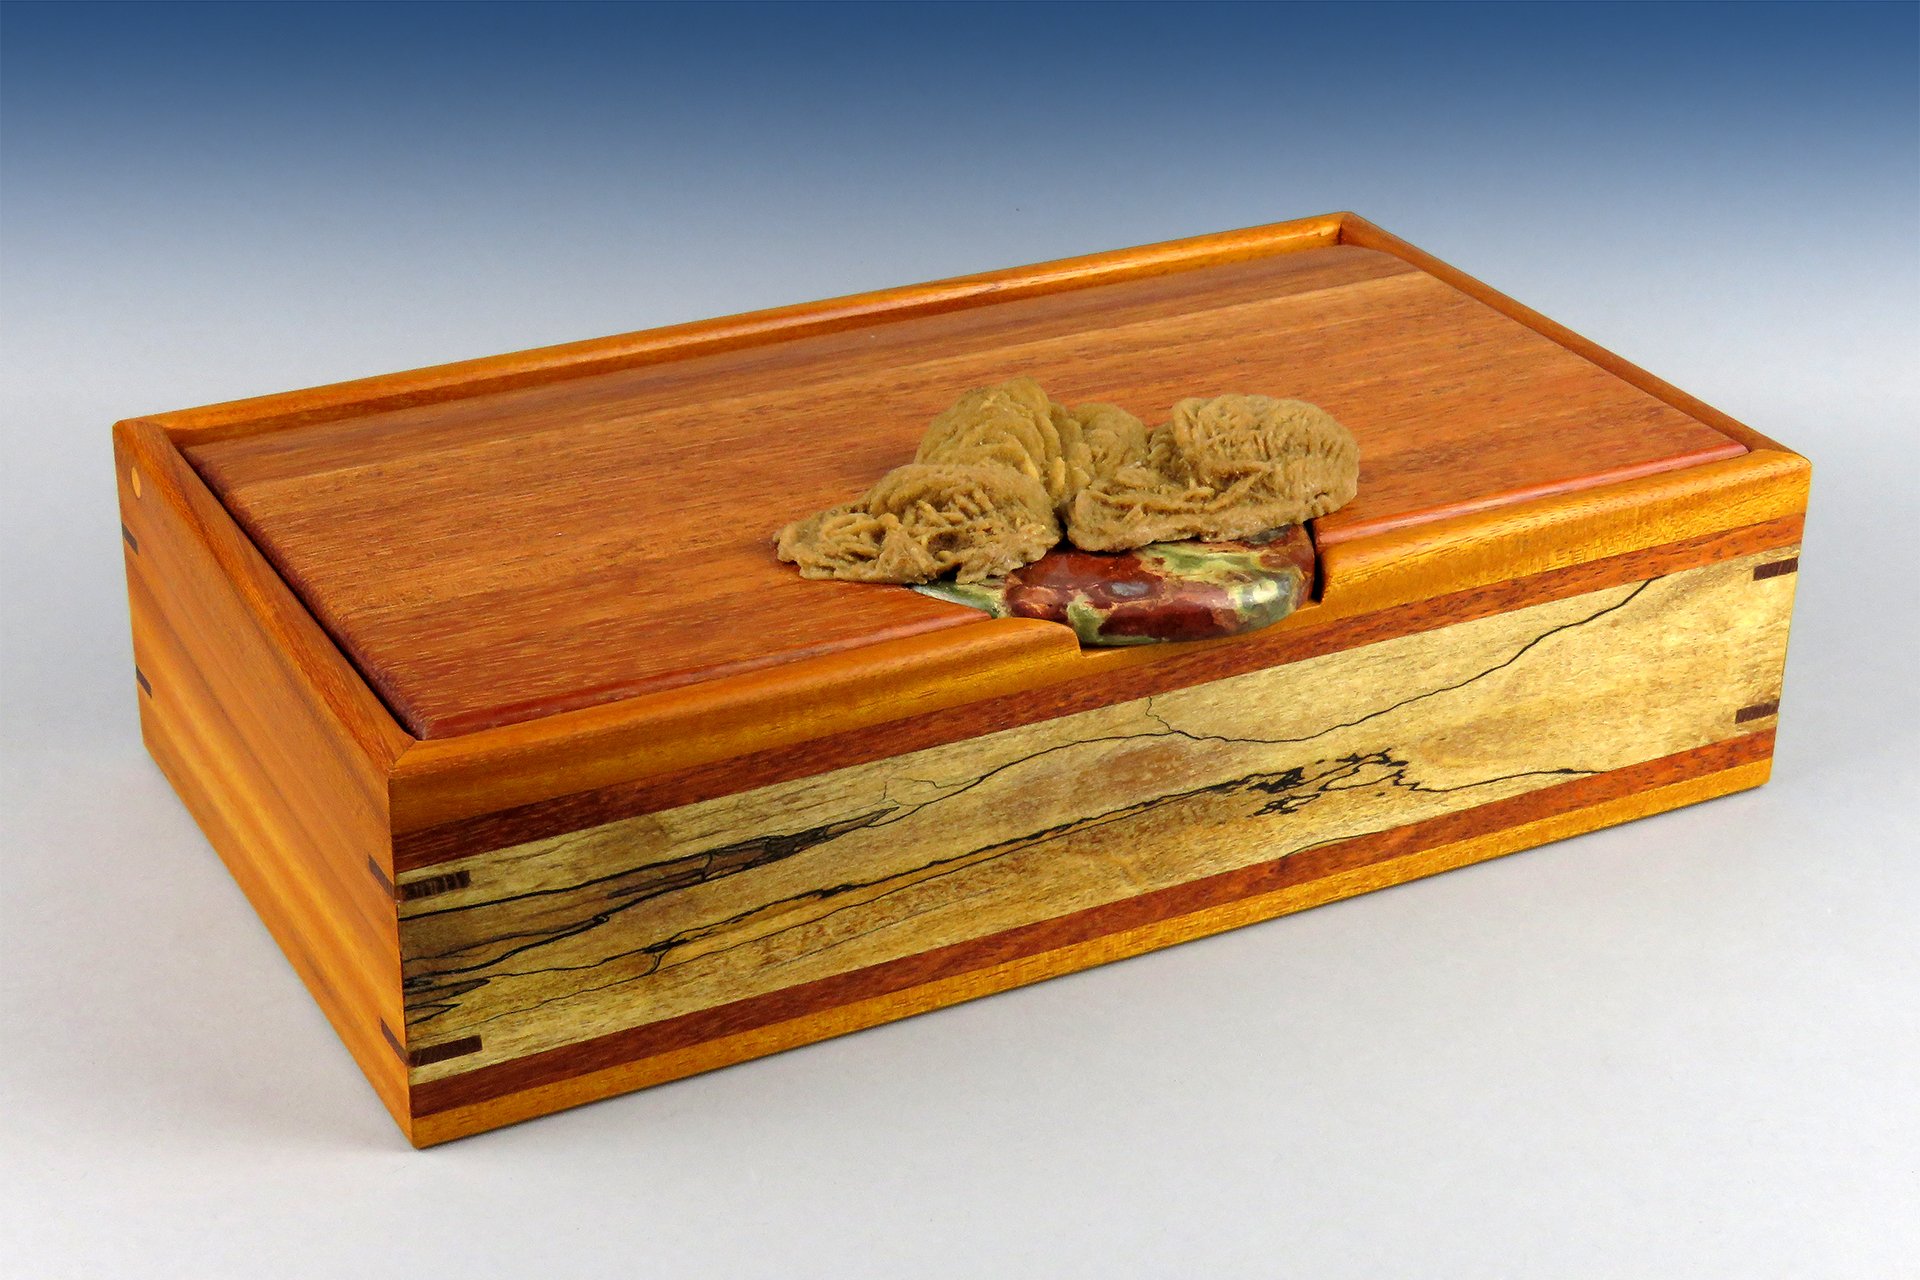 Our Gallery of Unusual Handmade Wood Boxes — Dead Horse Bay Arts